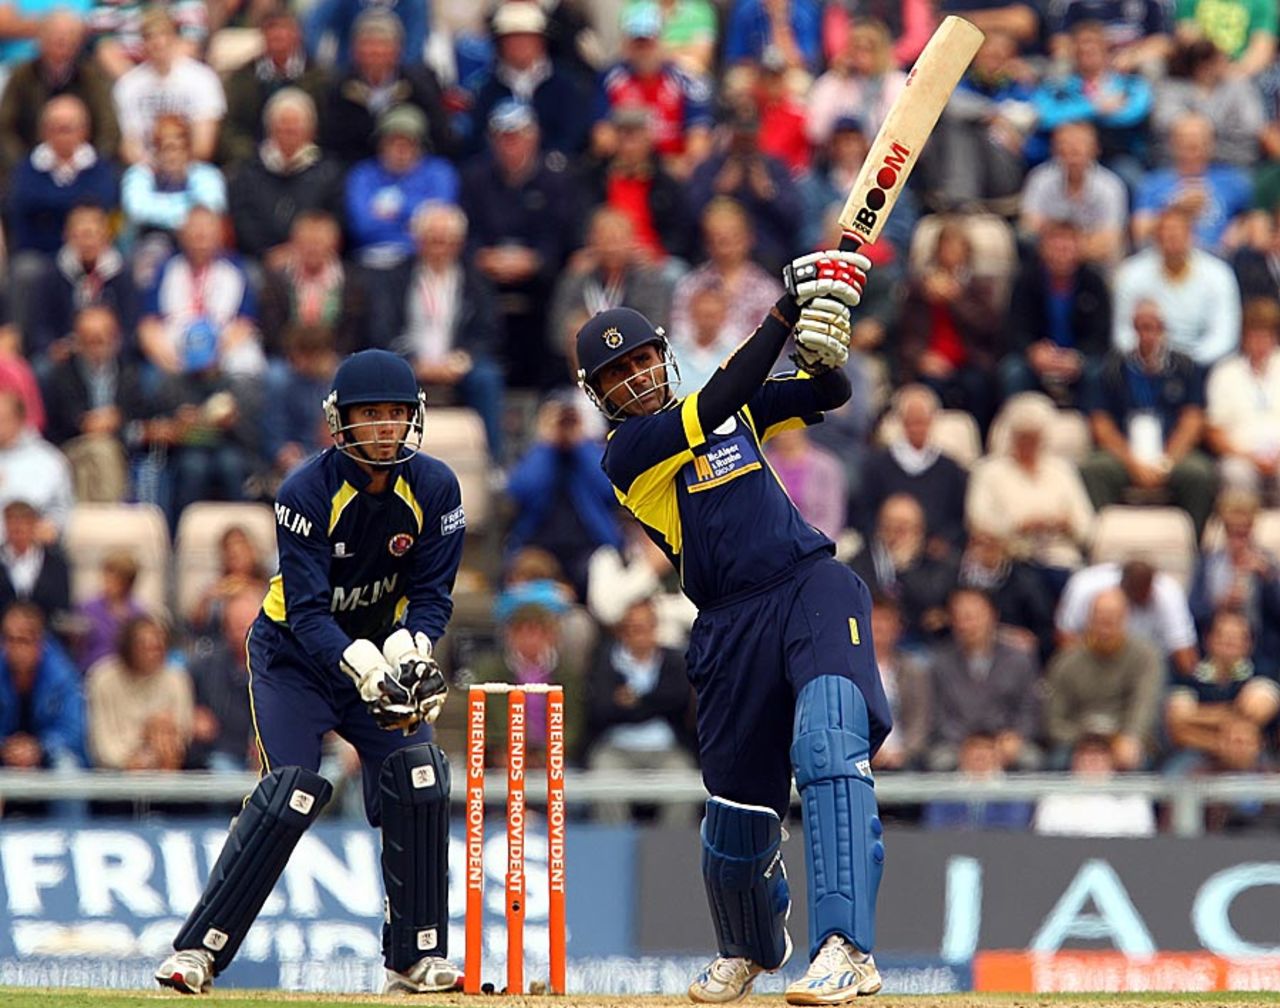 Abdul Razzaq gave early impetus to Hampshire's chase, Hampshire v Essex, 1st semi-final, Friends Provident t20, Rose Bowl, August 14, 2010